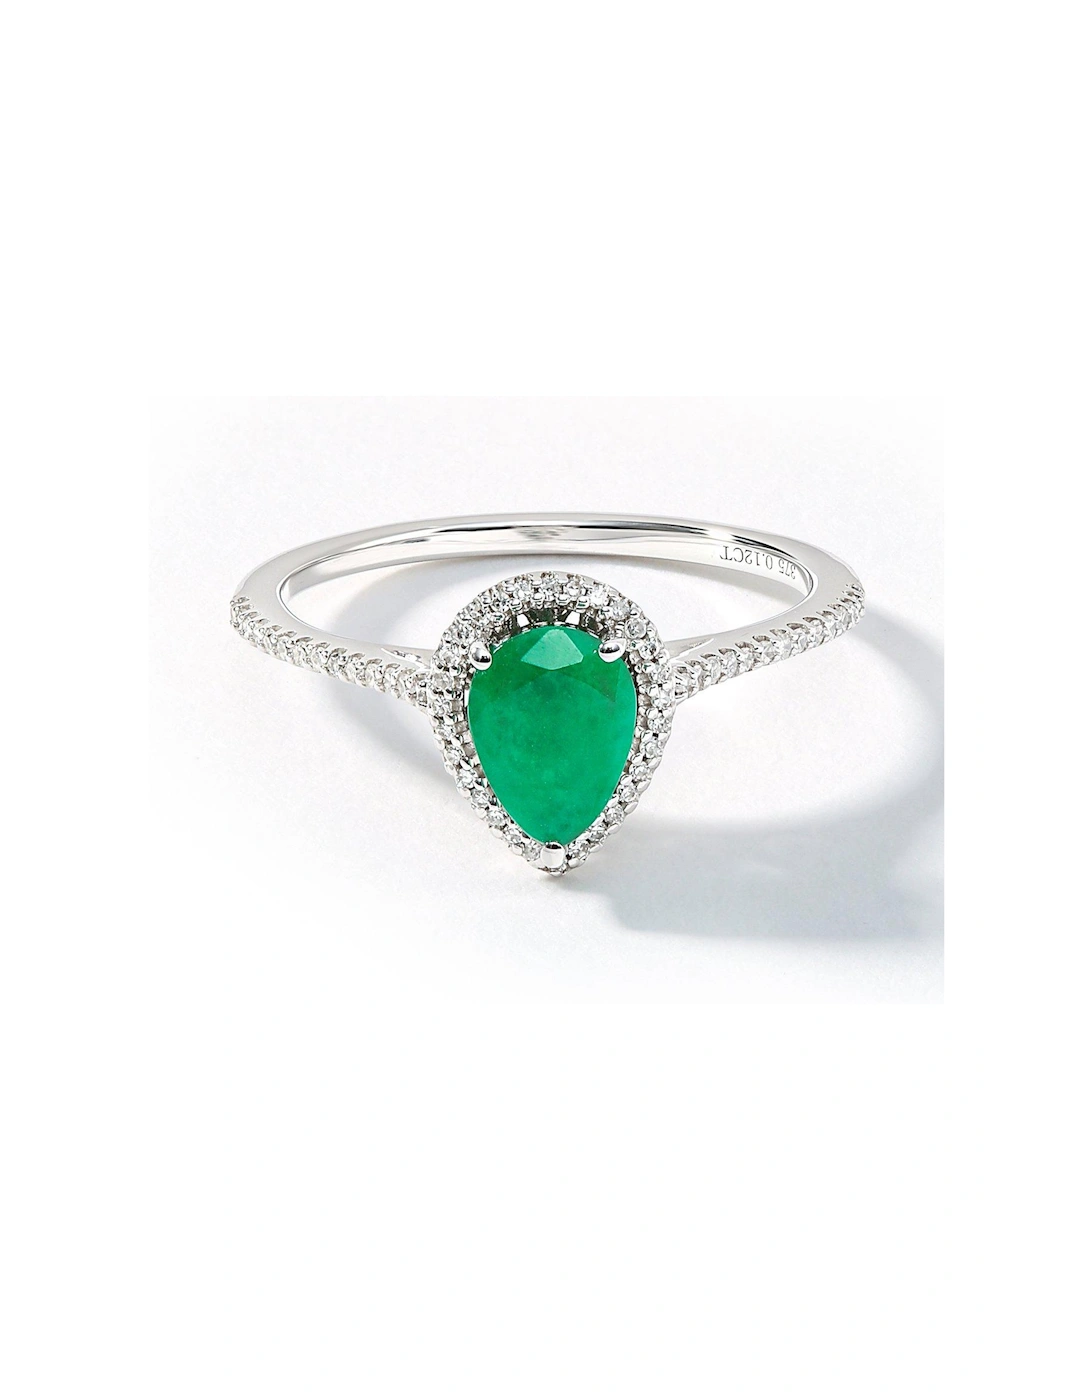 9ct White Gold 7x5 Pear Natural Emerald and 0.14ct Diamond Halo Ring, 2 of 1